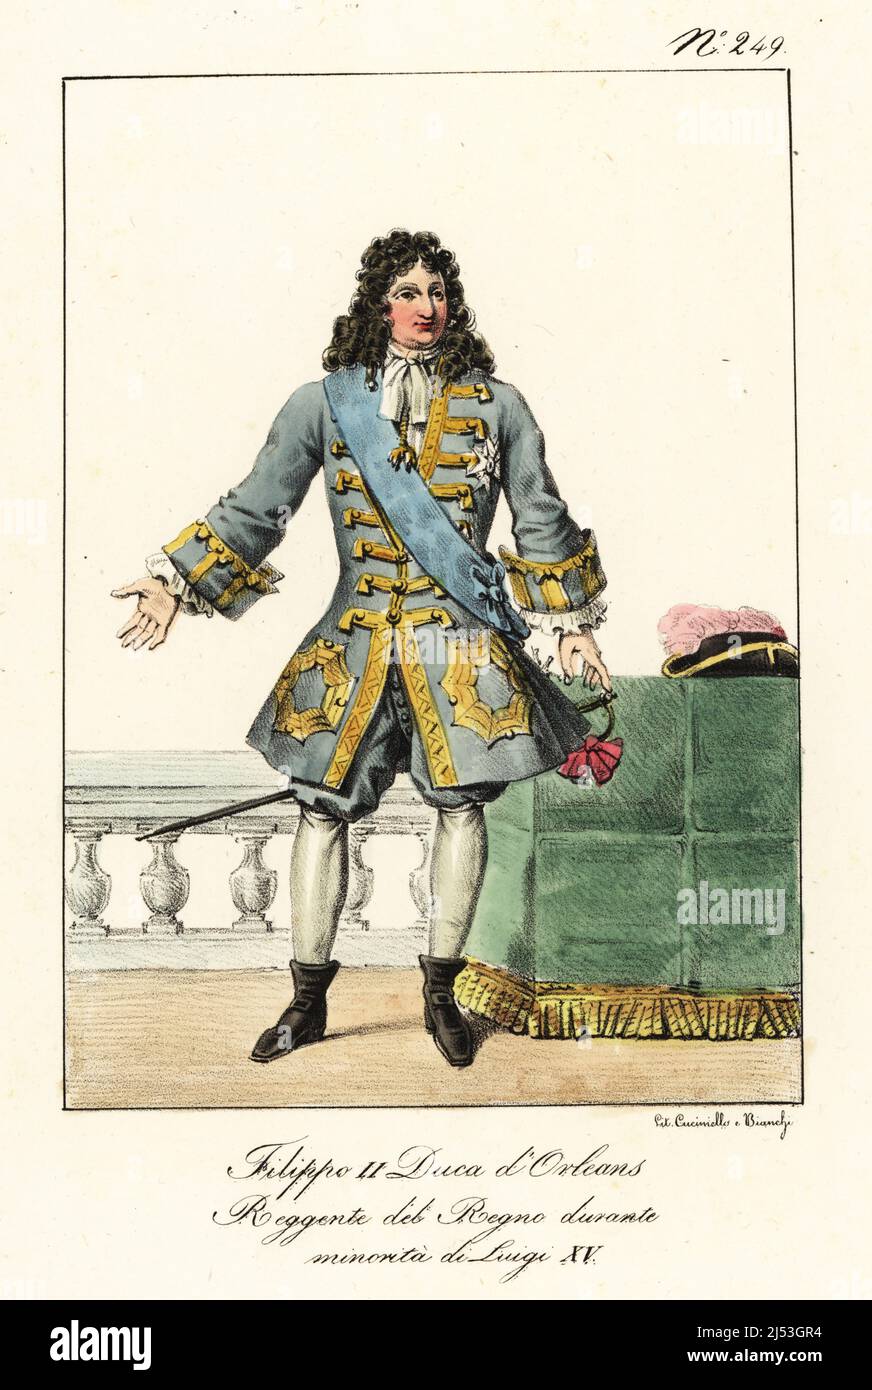 Philippe II, Duke of Orleans, 1674-1723, French royal, soldier, and statesman who served as Regent of France. In blue coat with gold frogging, cravatte, breeches, hose, bootlets, with court sword. Philippe II. Duc d'Orleans. Regent du Royaume pendant le minorite de Louis XV. Handcoloured lithograph by Lorenzo Bianchi and Domenico Cuciniello after Hippolyte Lecomte from Costumi civili e militari della monarchia francese dal 1200 al 1820, Naples, 1825. Italian edition of Lecomte’s Civilian and military costumes of the French monarchy from 1200 to 1820. Stock Photo